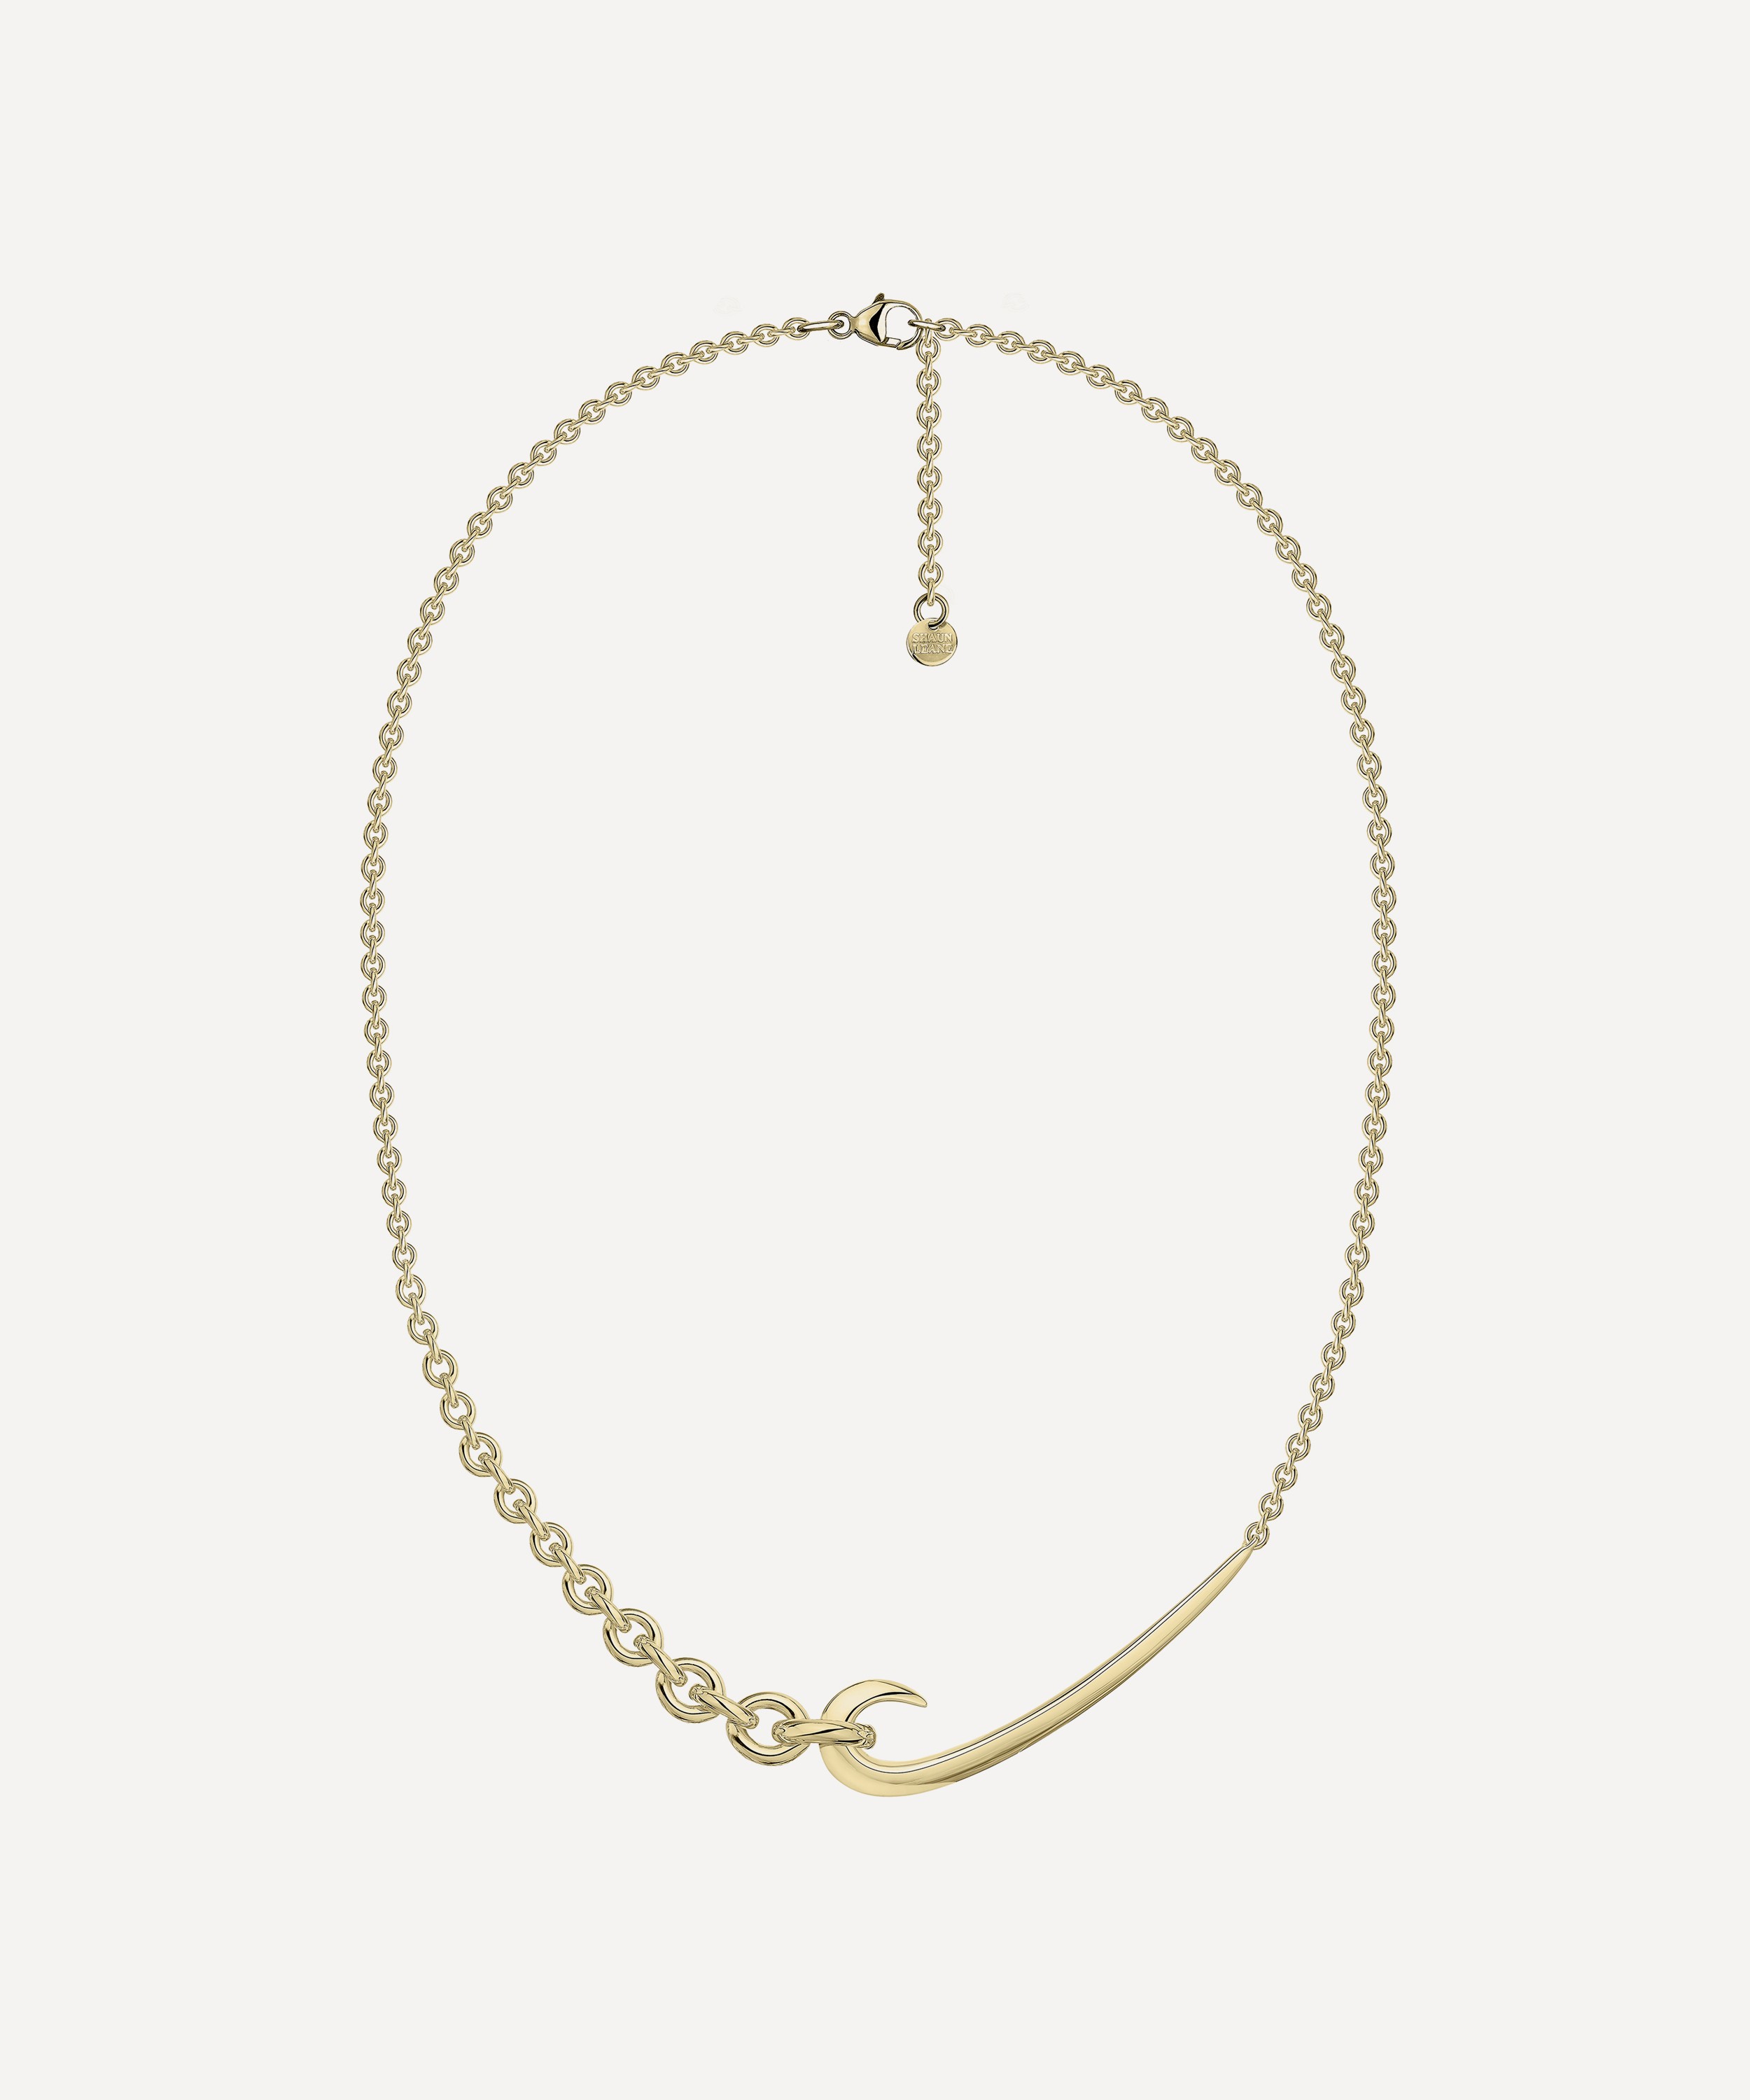 Shaun Leane - Gold Plated Vermeil Silver Hook Chain Choker Necklace